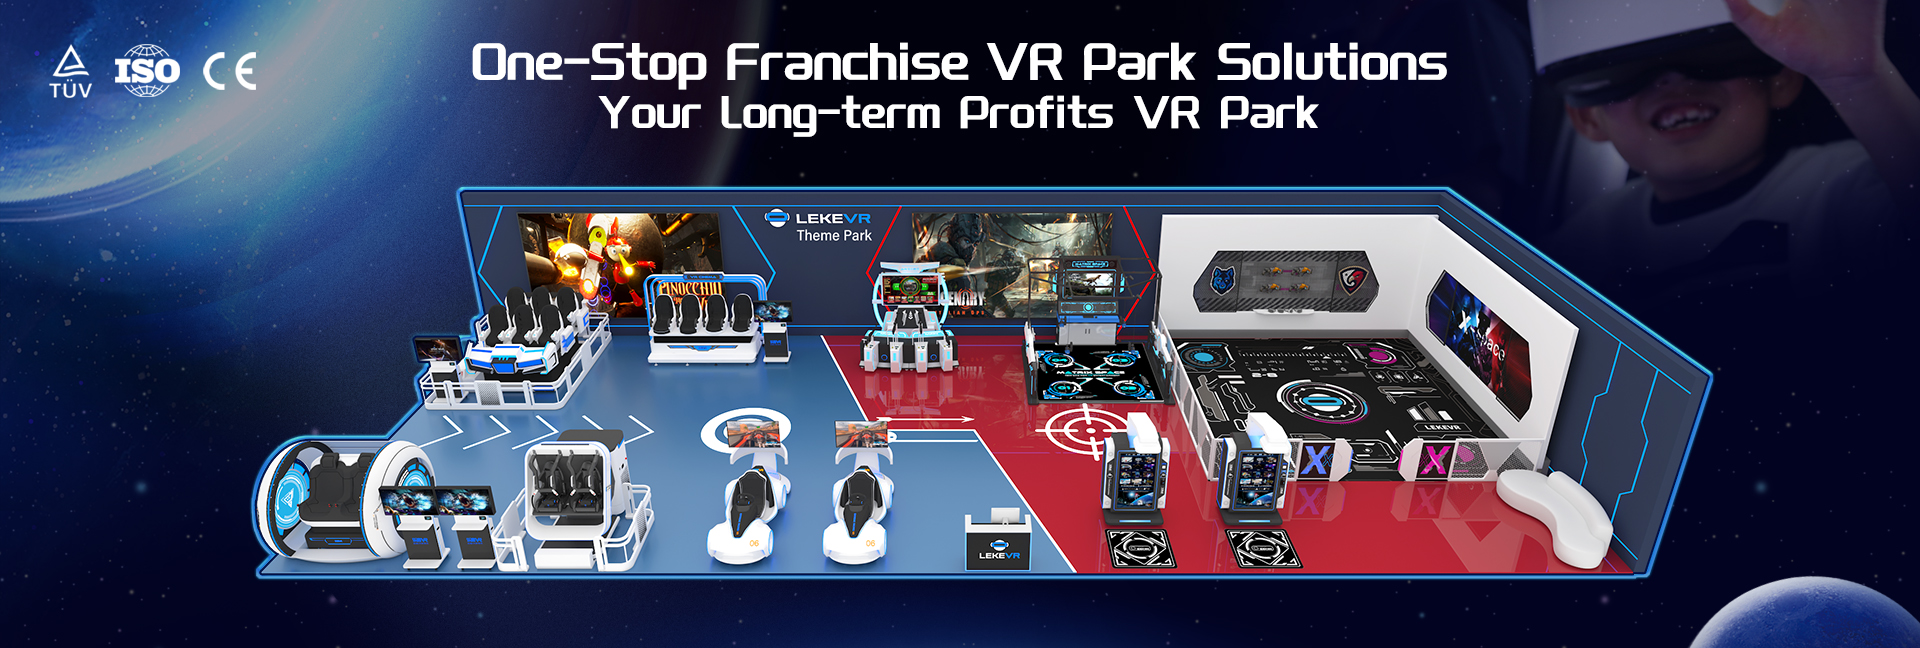 One-Stop Franchise VR Park Solutions 